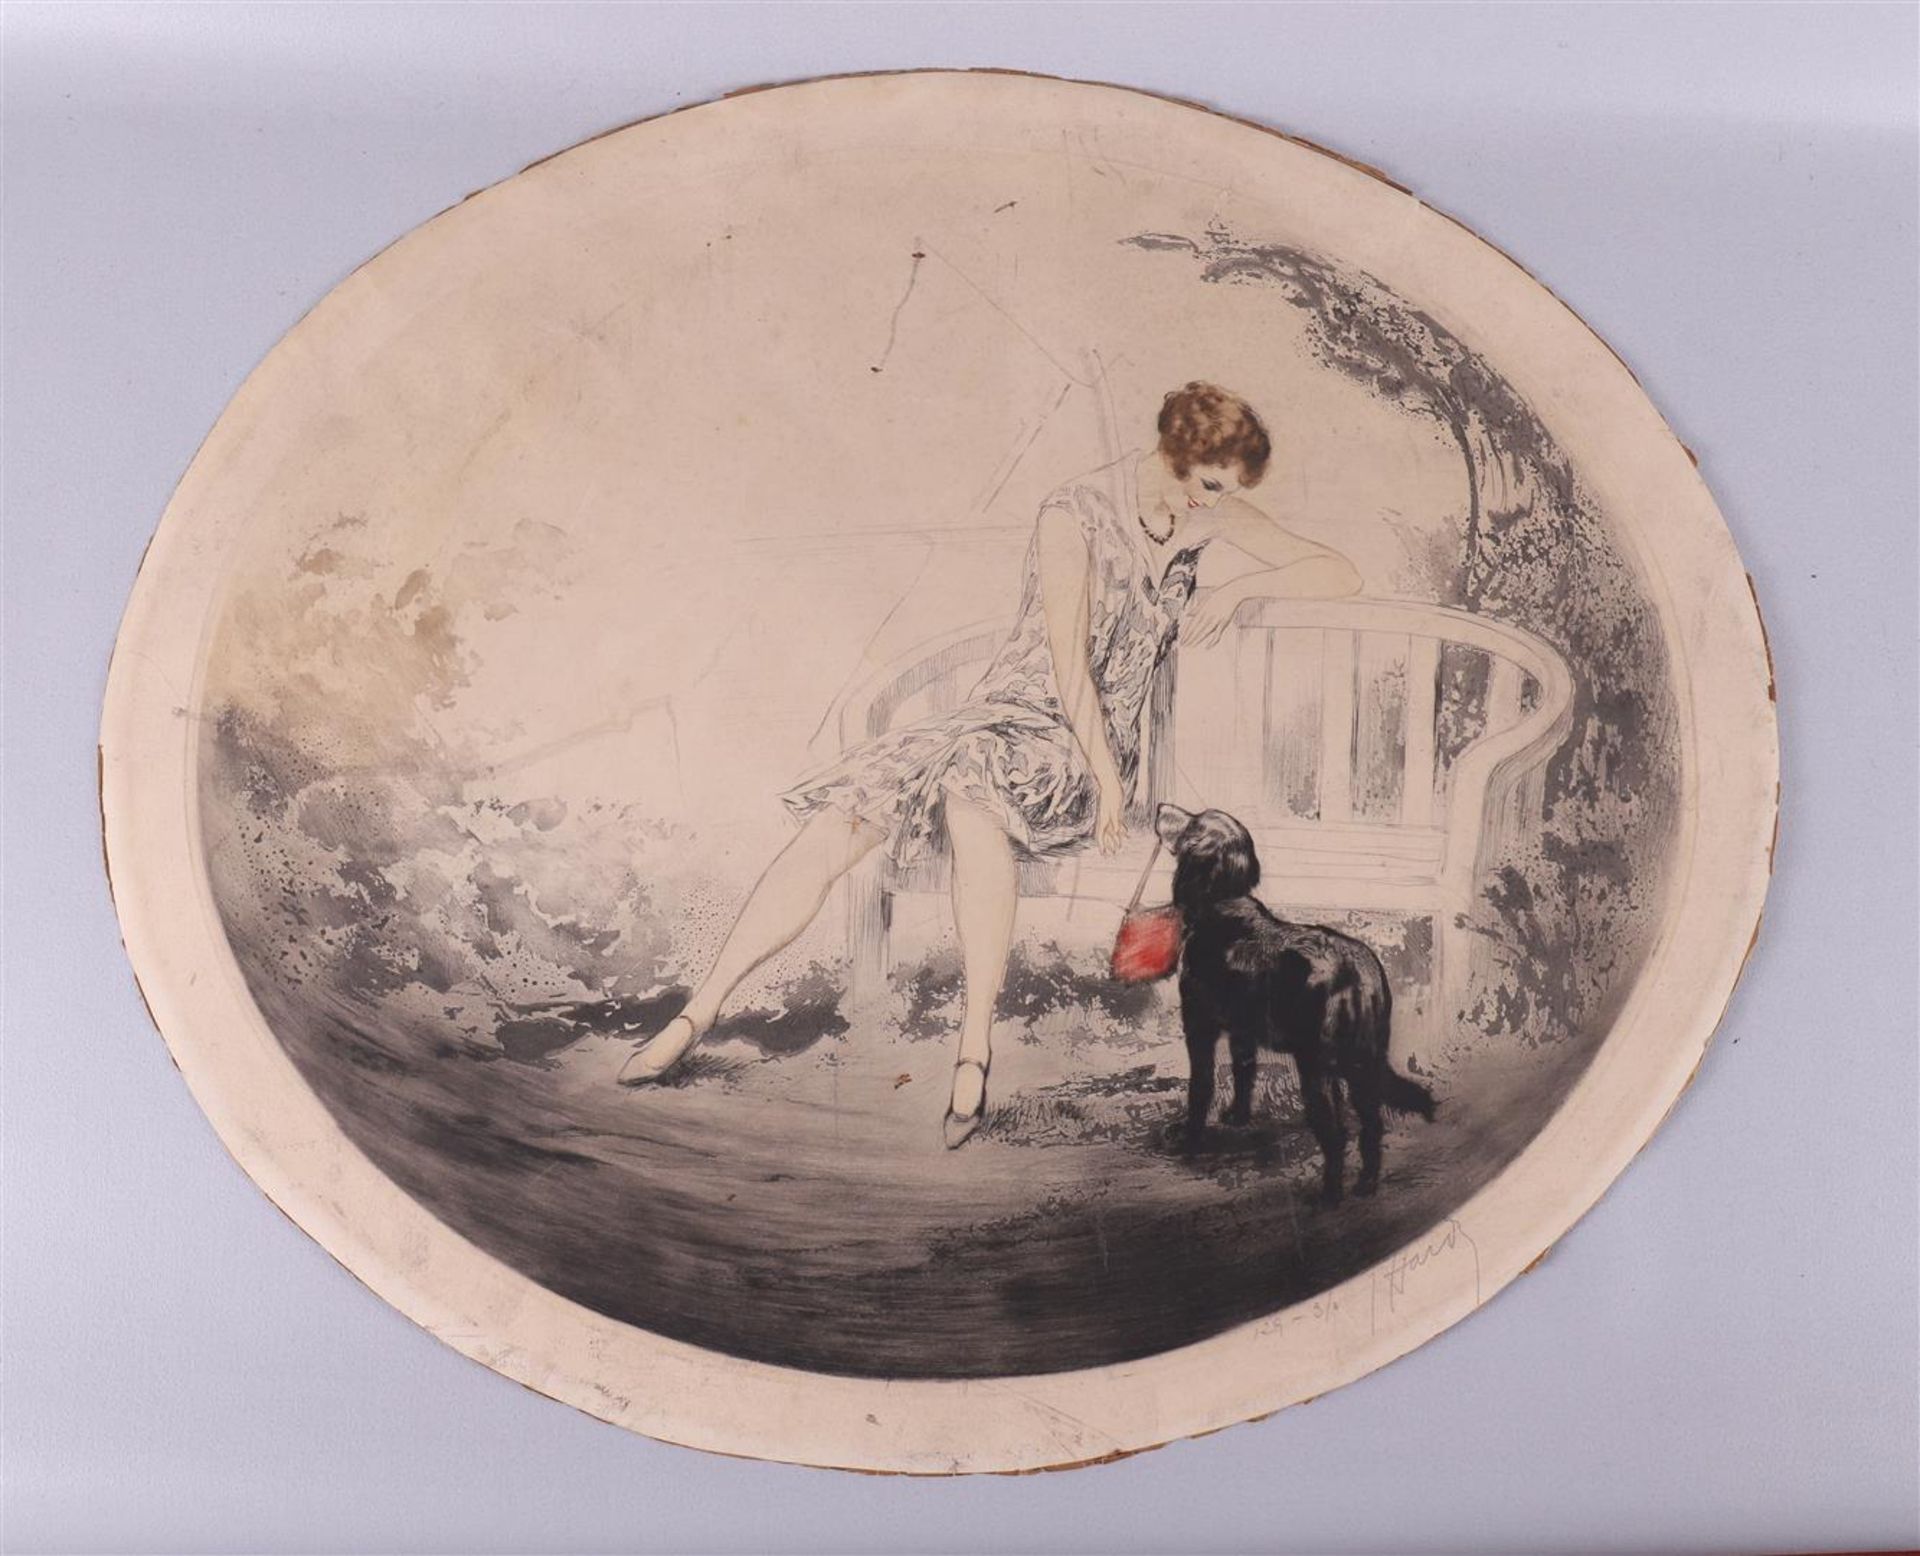 French school around 1900, in the manner of Louis Icart "Woman on a bench with dog", signed in